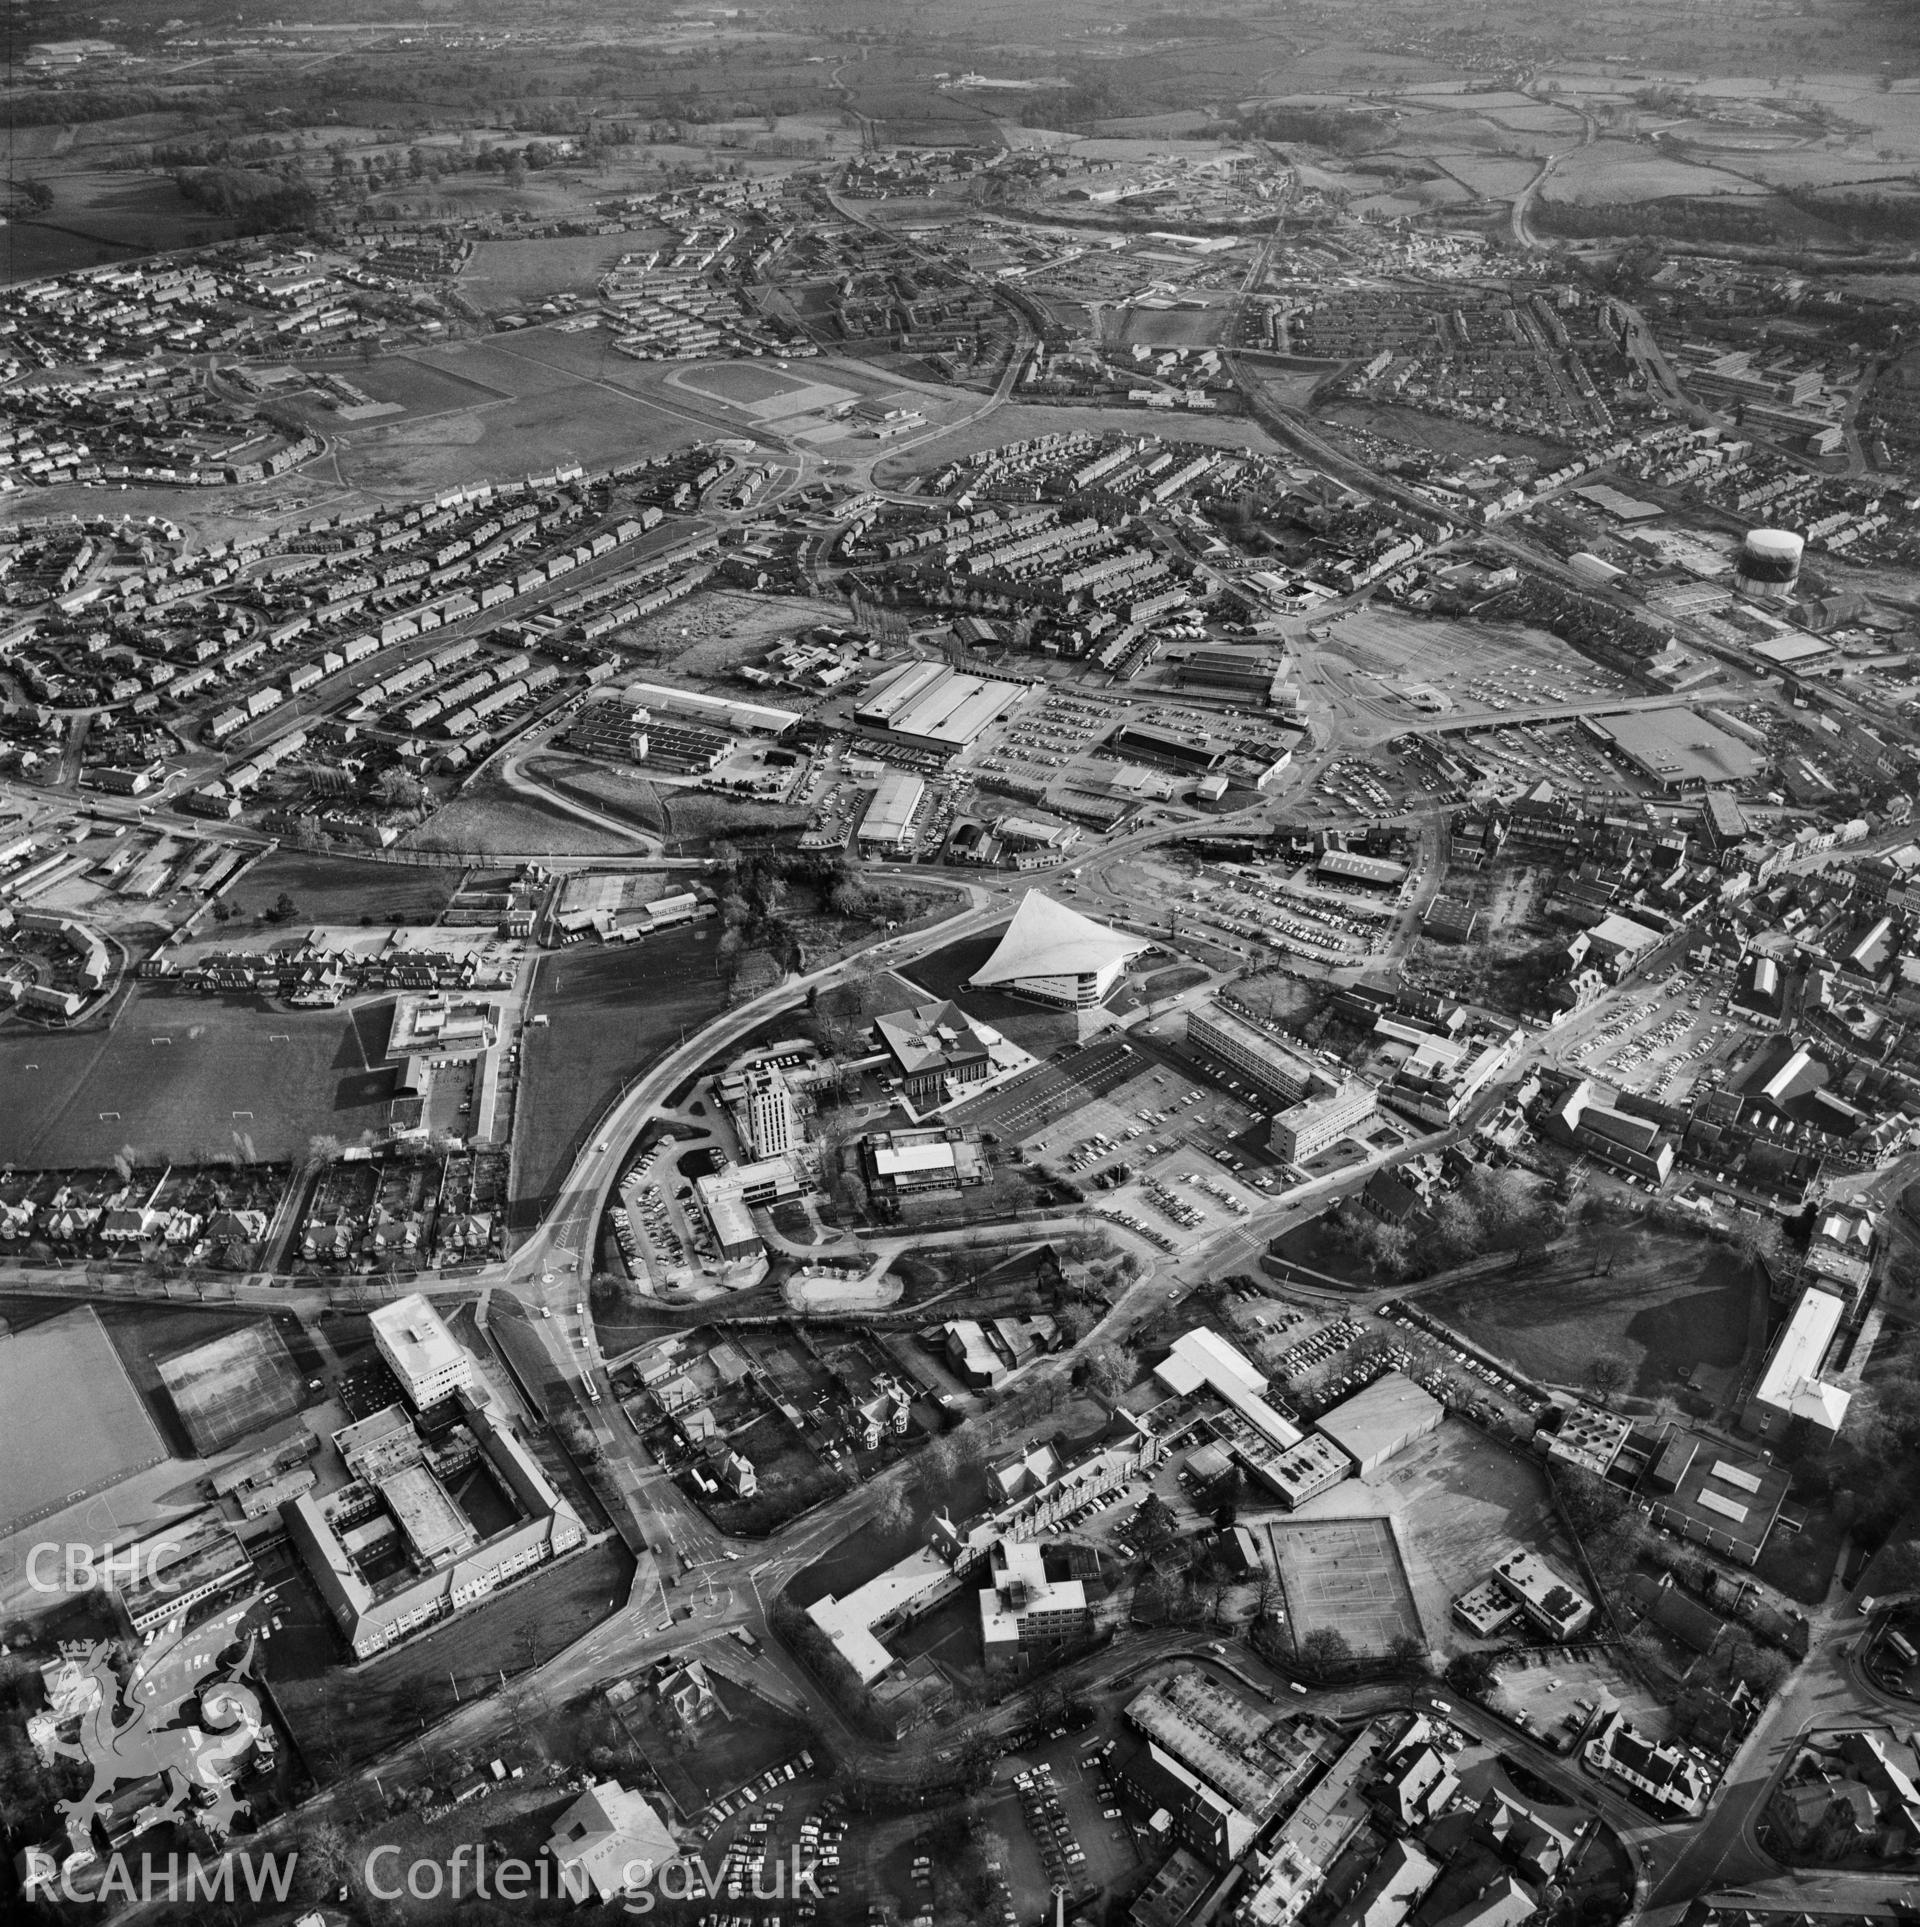 Black and white oblique aerial photograph showing the centre of   Wrexham,  from Aerofilms album, taken by Aerofilms Ltd and dated 1976.